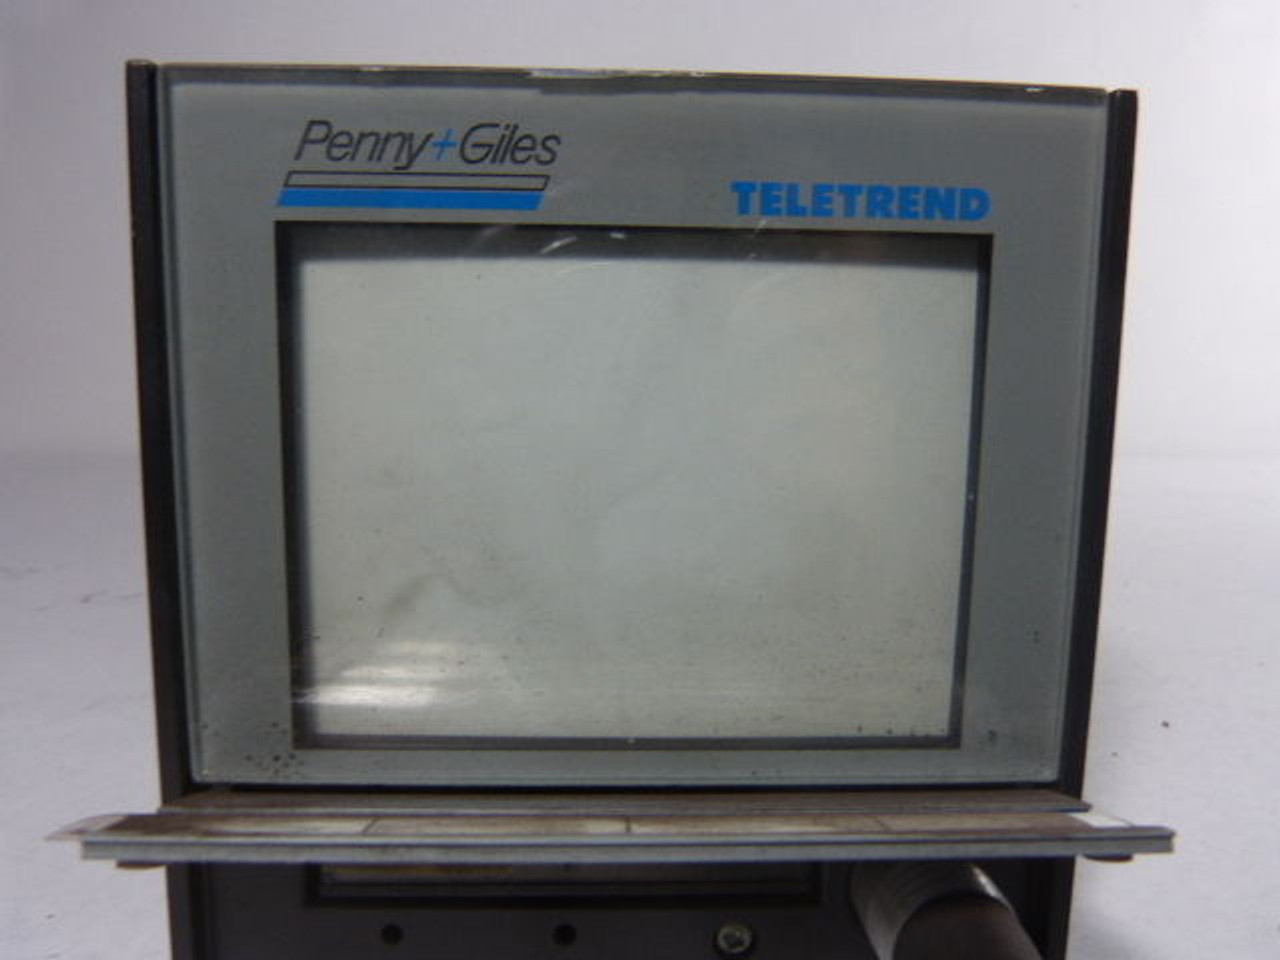 Penny & Giles TELETREND2 Data Recorder Process Instrument w/ Keypad USED